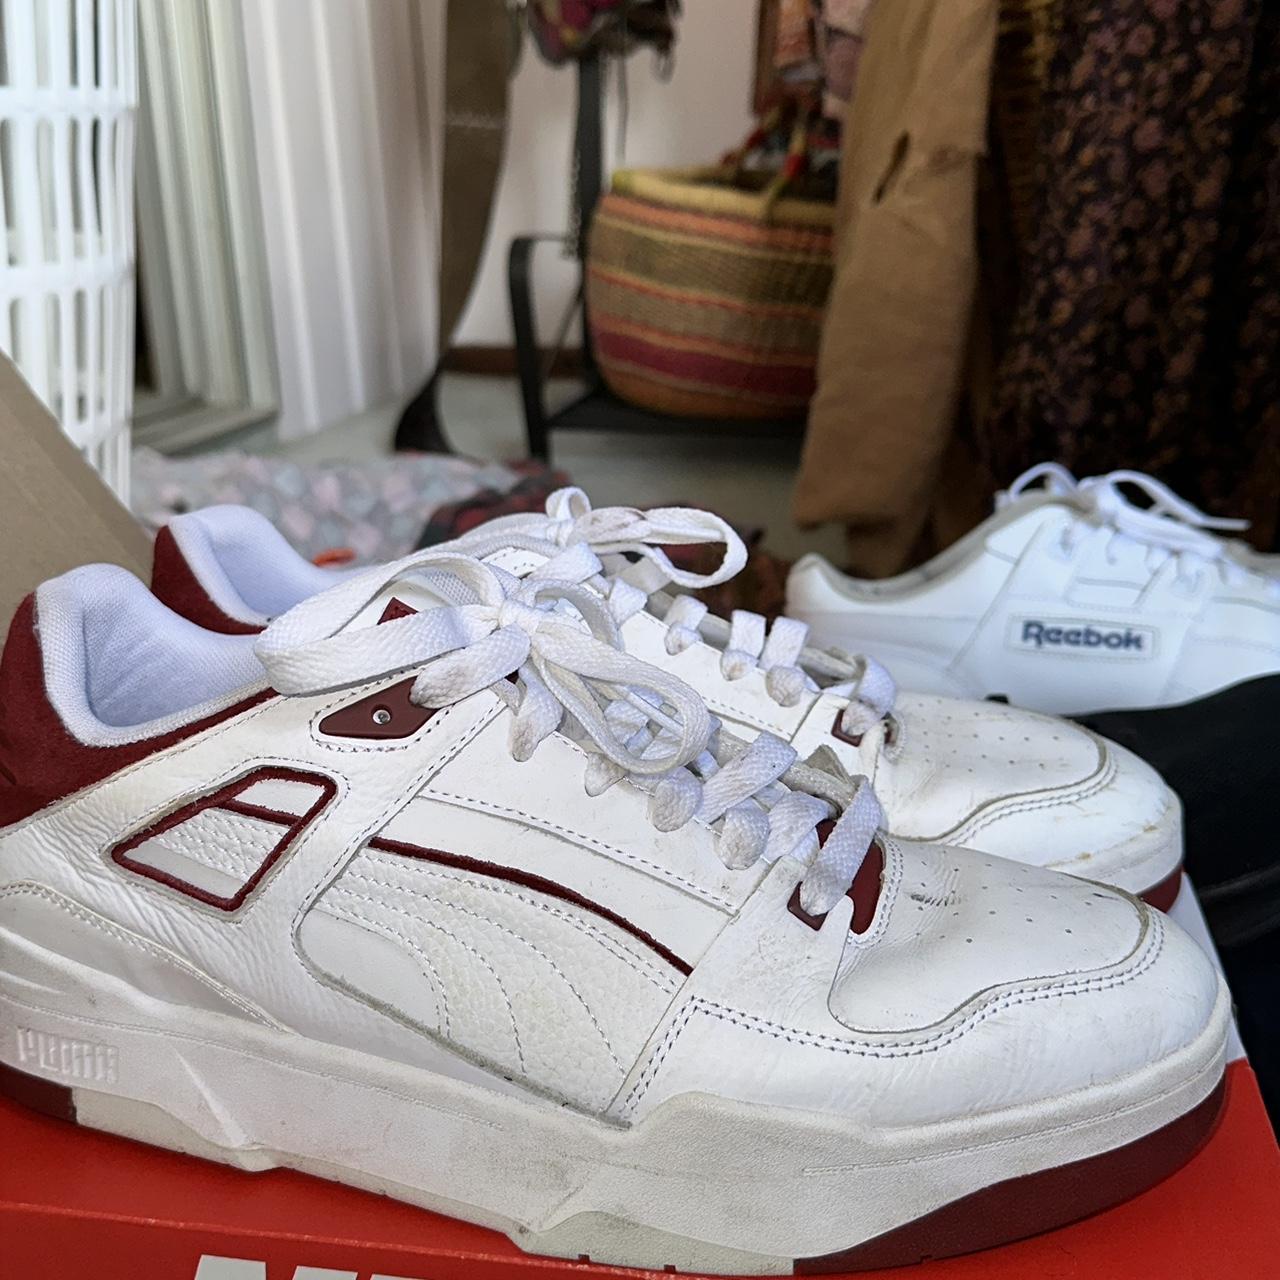 PUMA slipstream white and red sneakers dirty and... - Depop